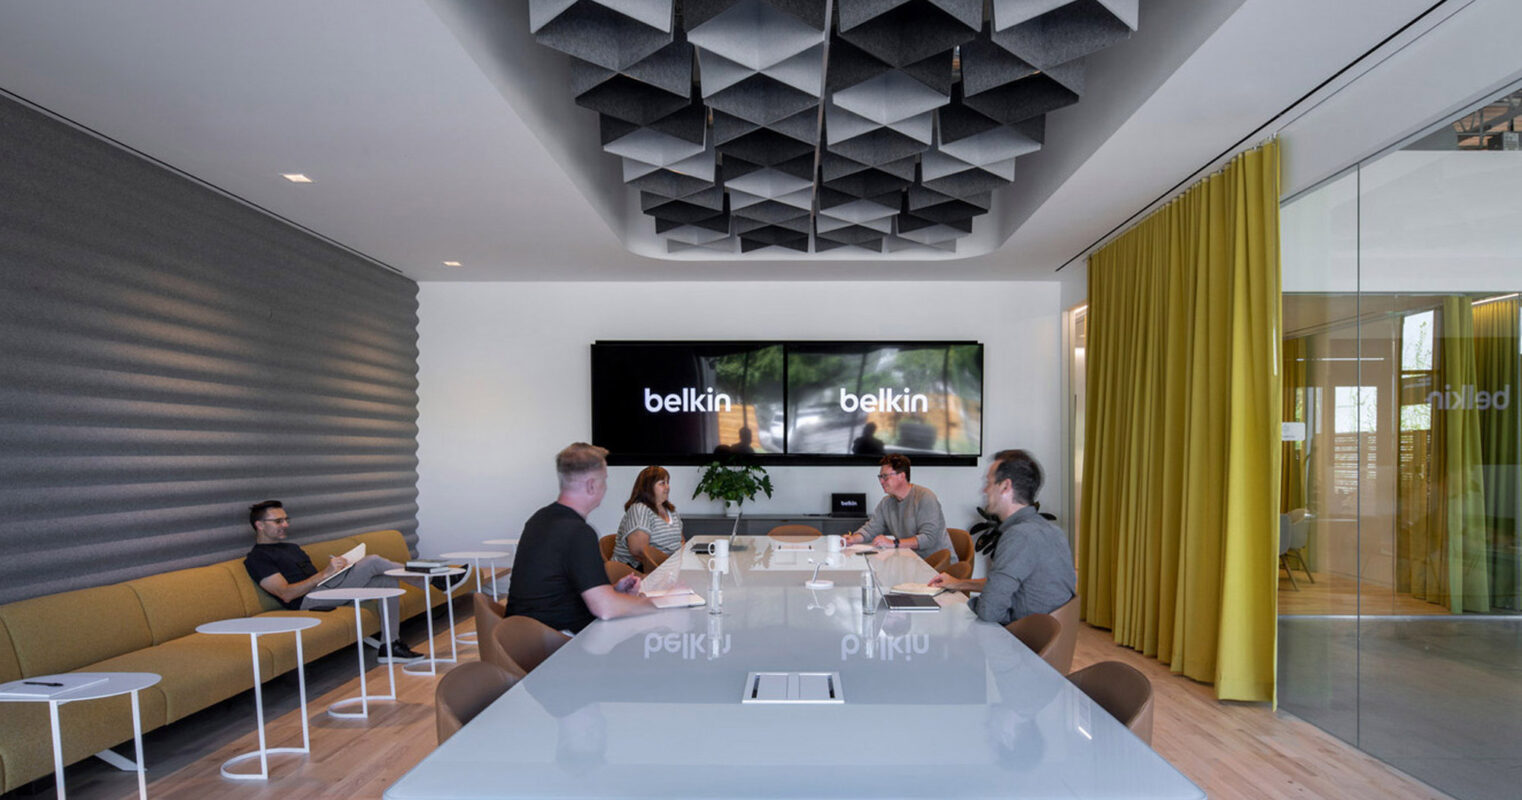 Modern corporate meeting room featuring a sleek wooden table, angular black acoustic ceiling panels, a digital screen for presentations, and full-height glass walls. Neutral tones are complemented by pops of color from mustard draperies and upholstered office chairs.